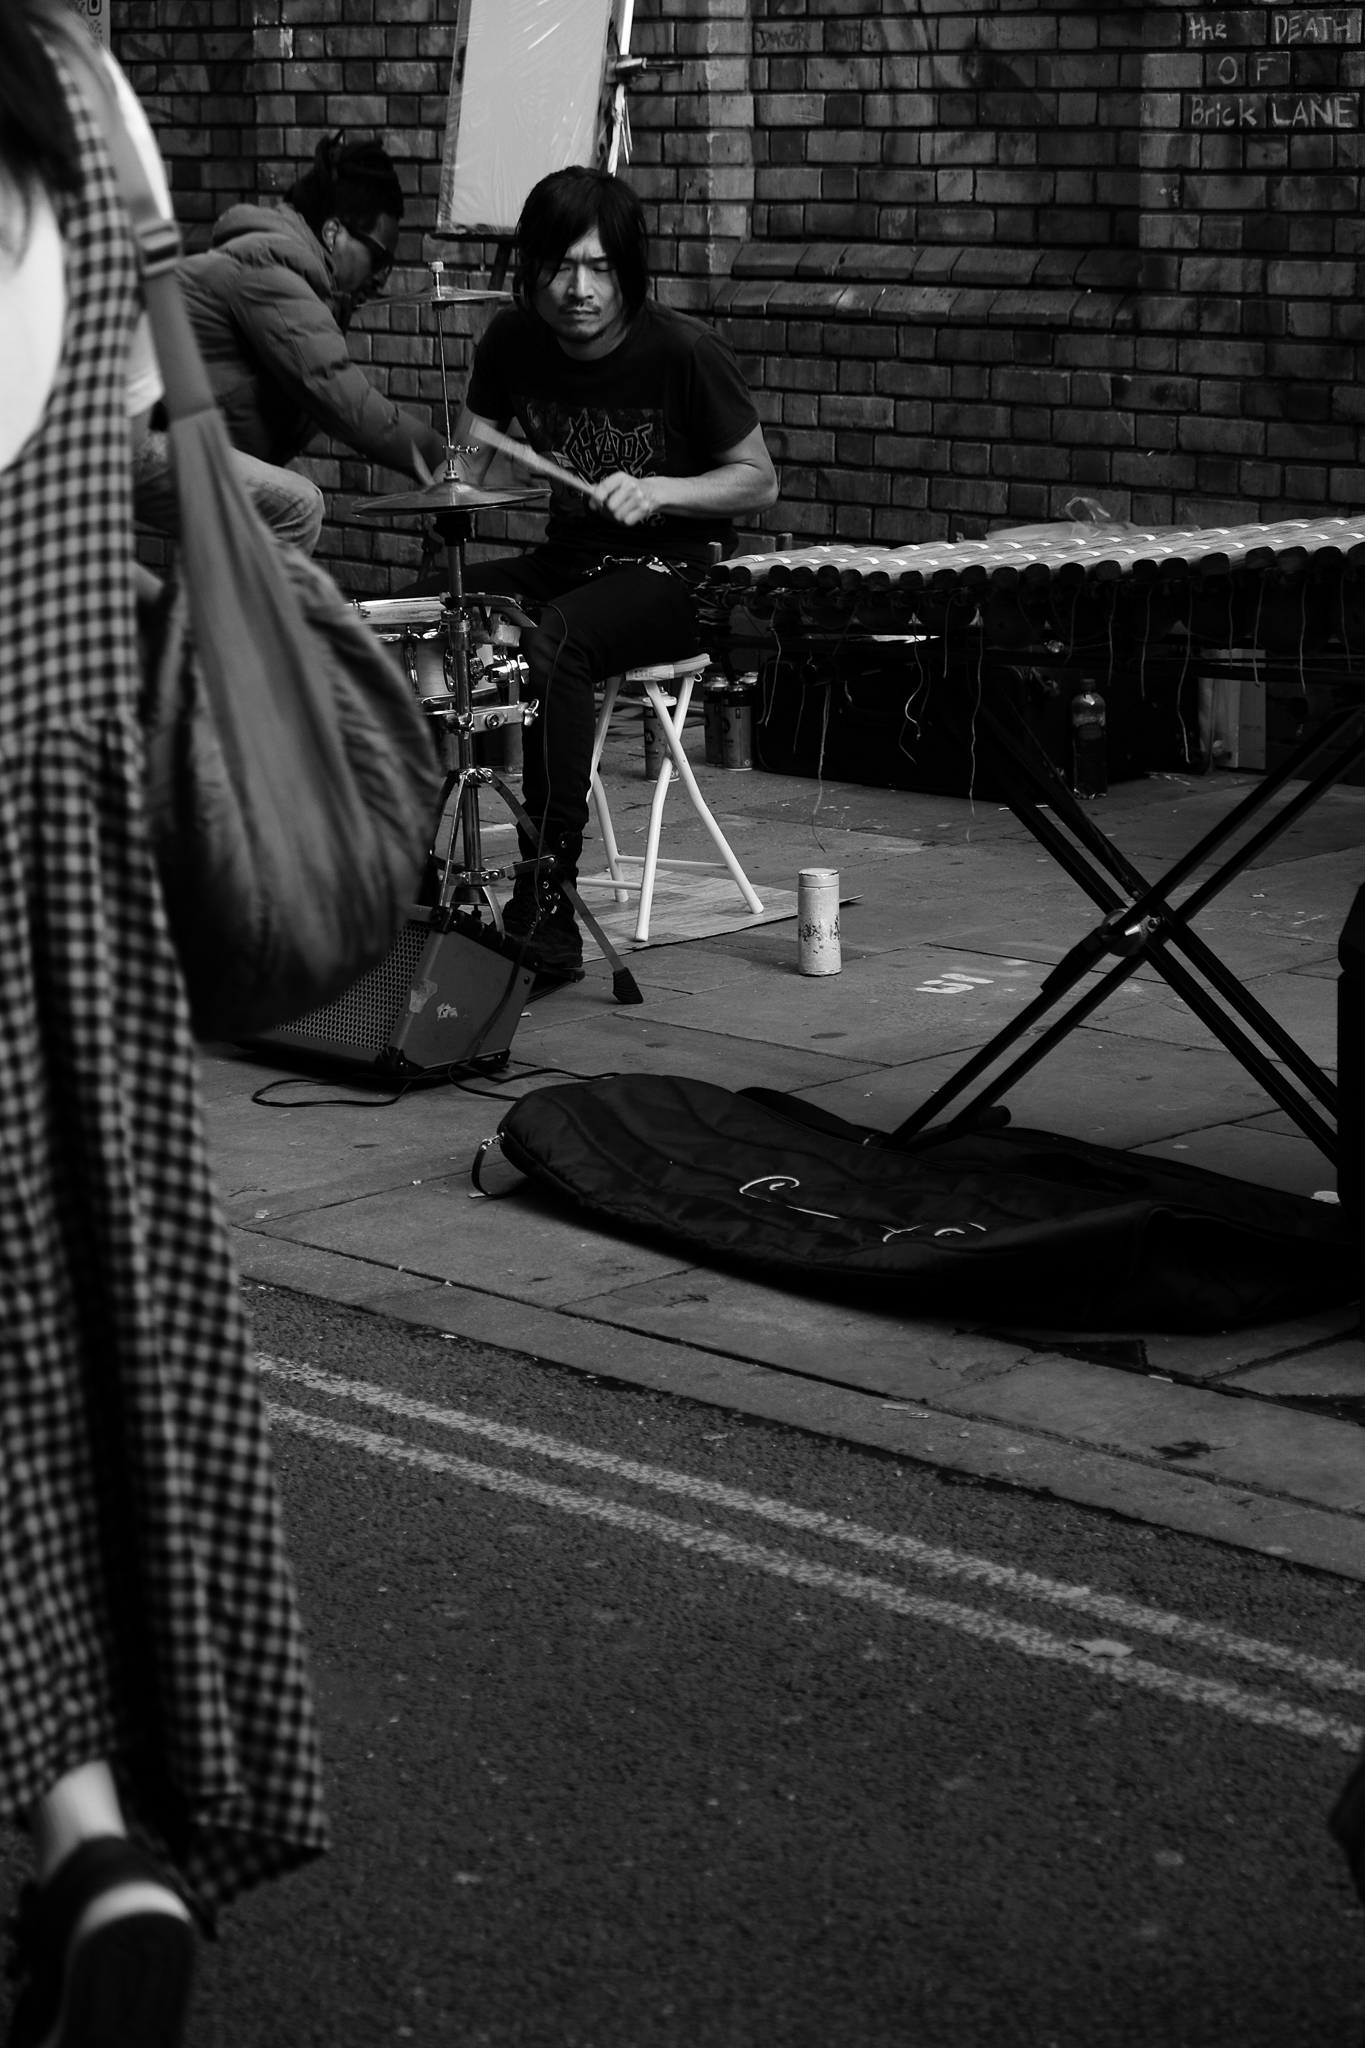 Black and white image of an asian man playing drums on the sidewalk. He rocked a very up-tempo drum and bass rhythm.